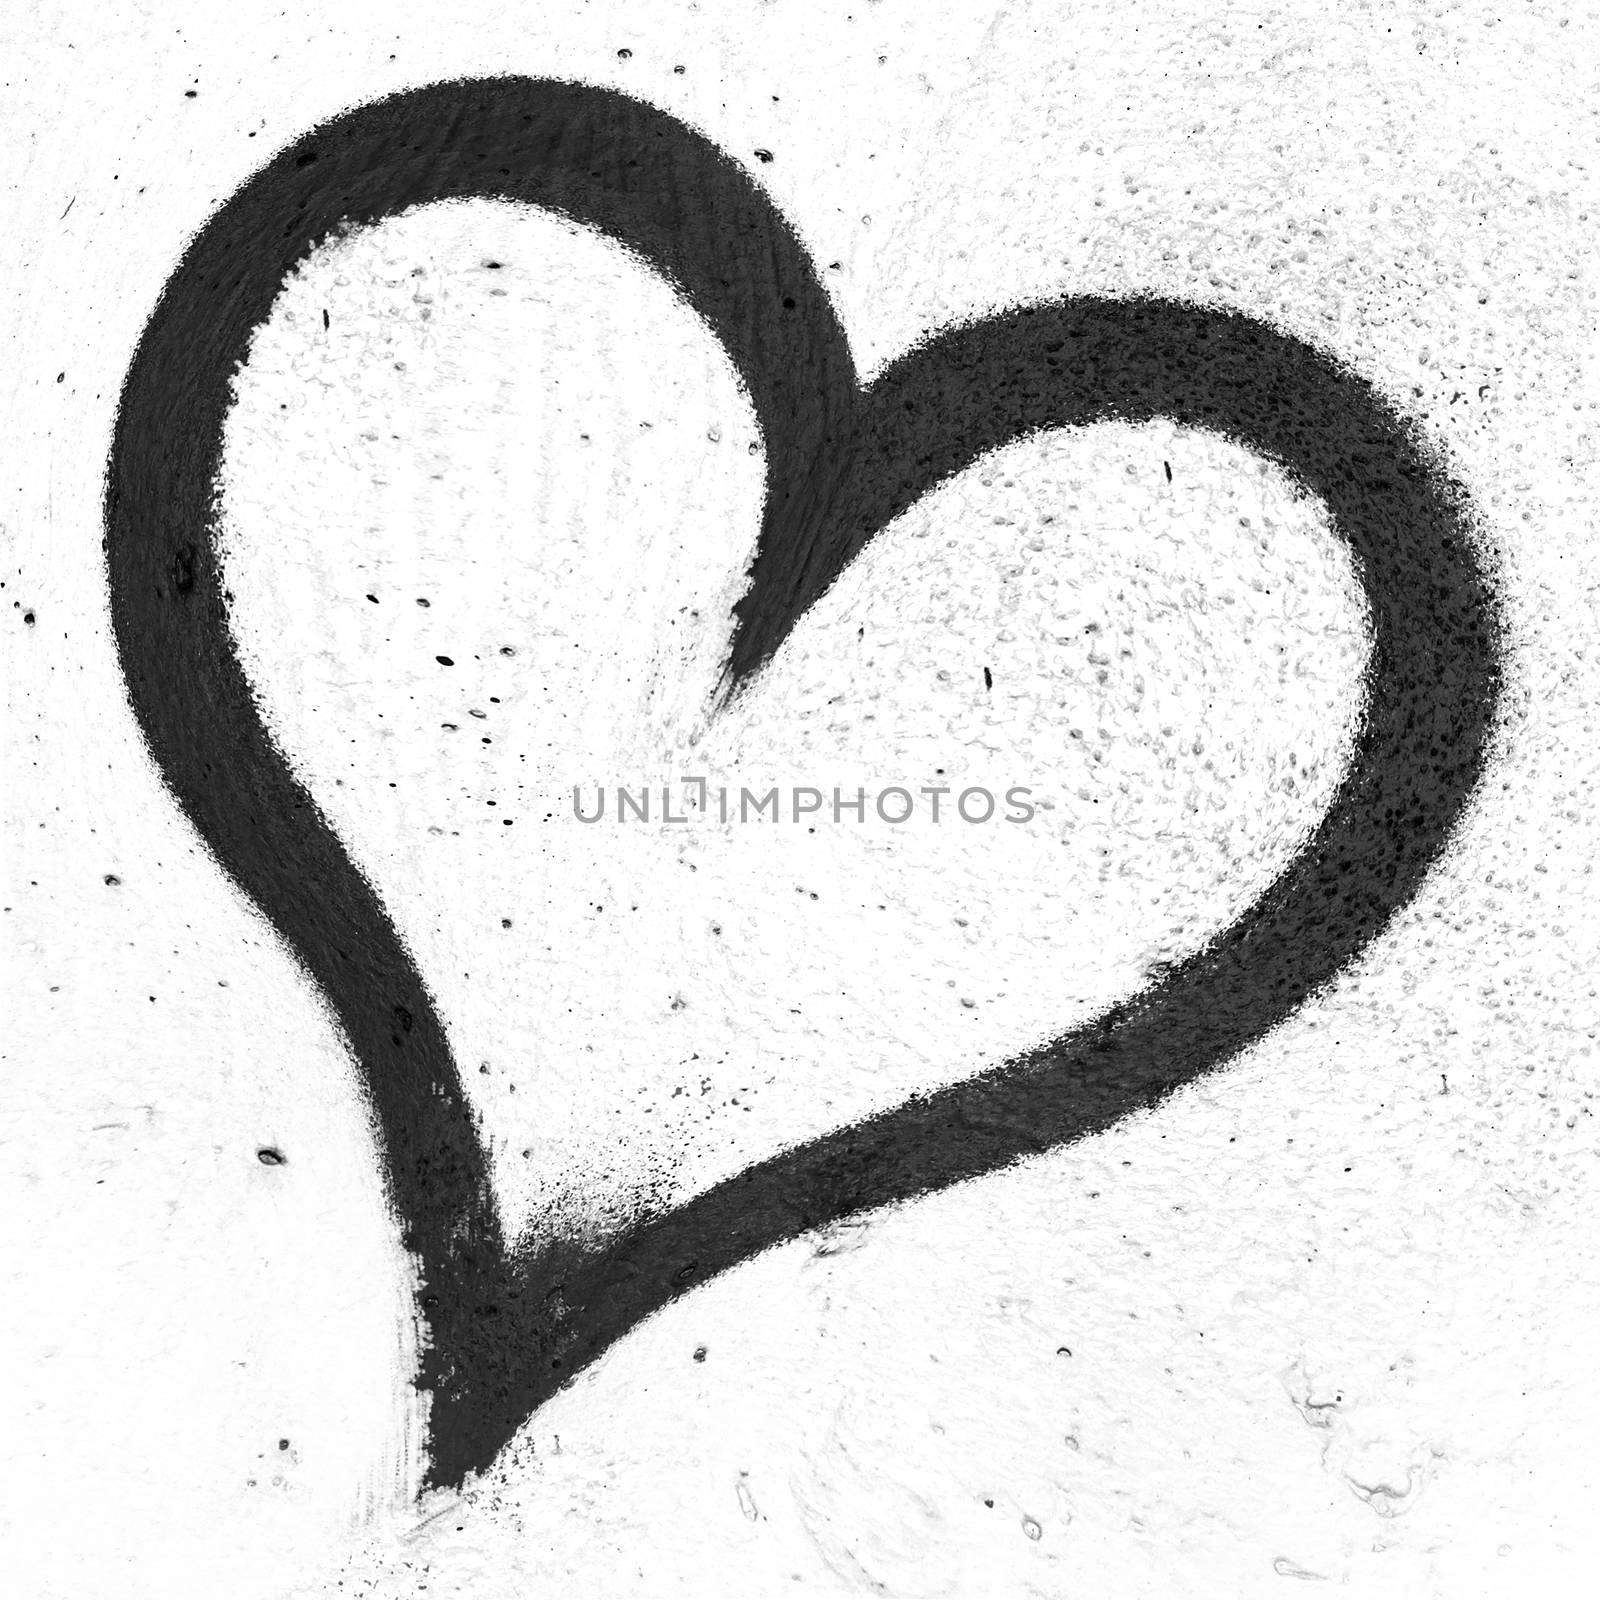 Concept or conceptual painted black abstract heart shape love symbol, dirty wall background, metaphor to urban and romantic valentine, grungy style.